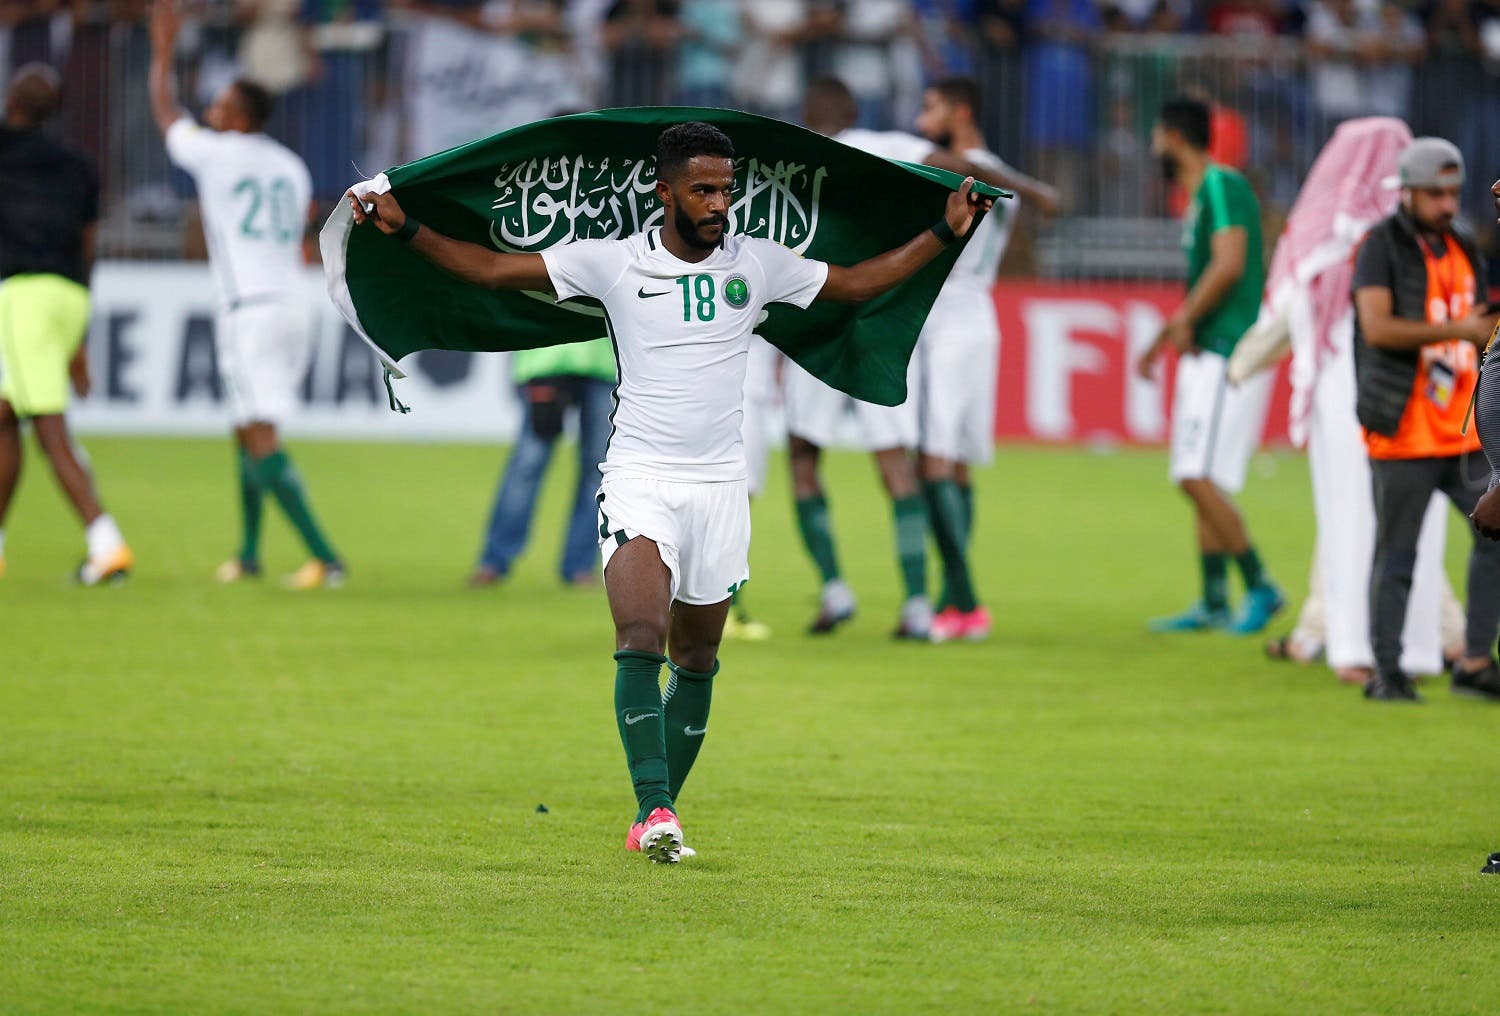 Saudi Arabia is the first Arab team to qualify for the World Cup in